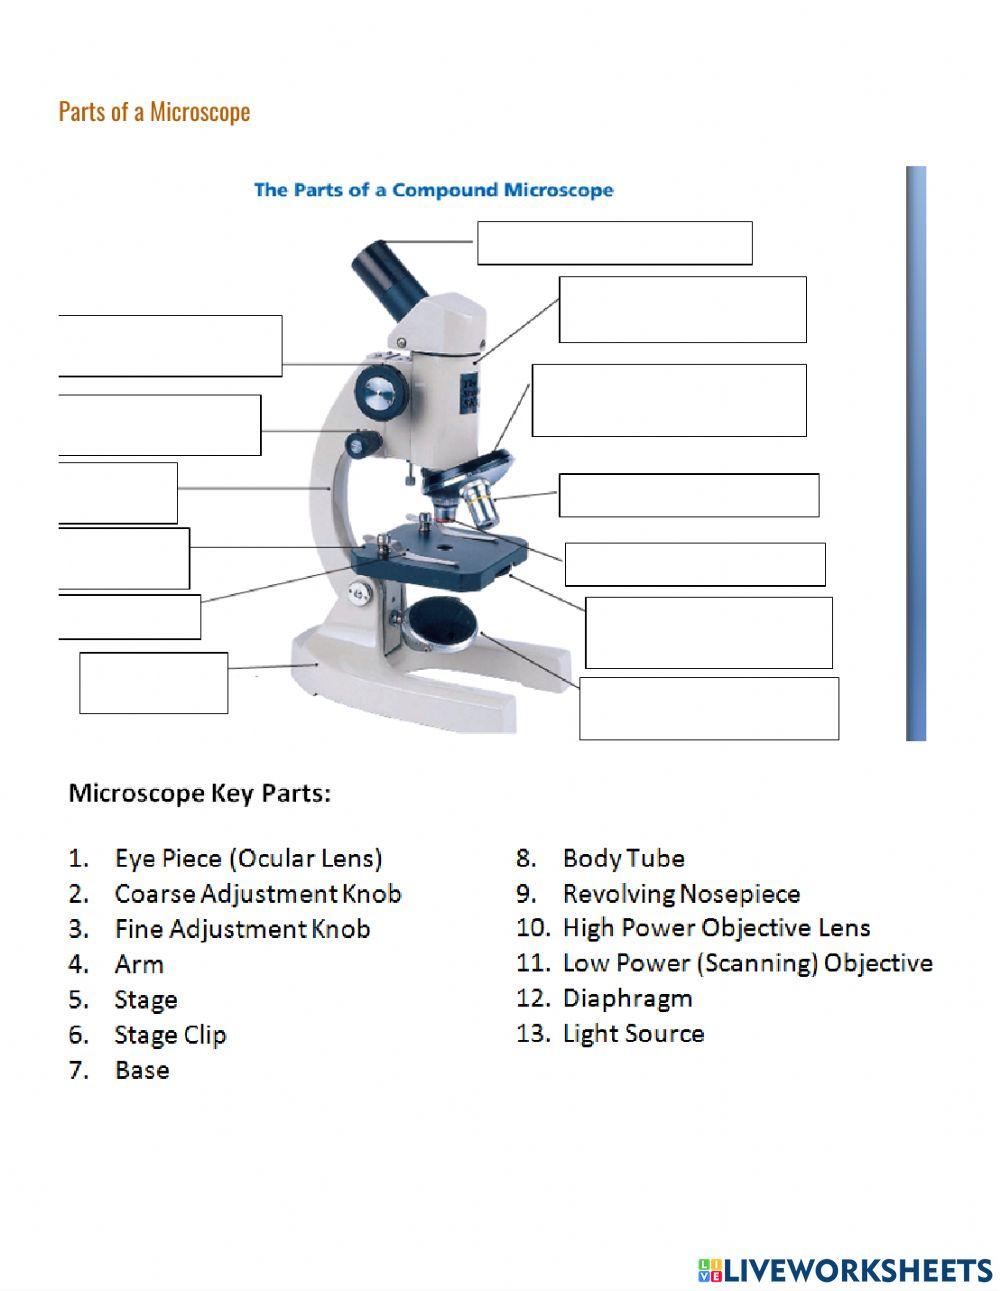 Parts of a Microscope